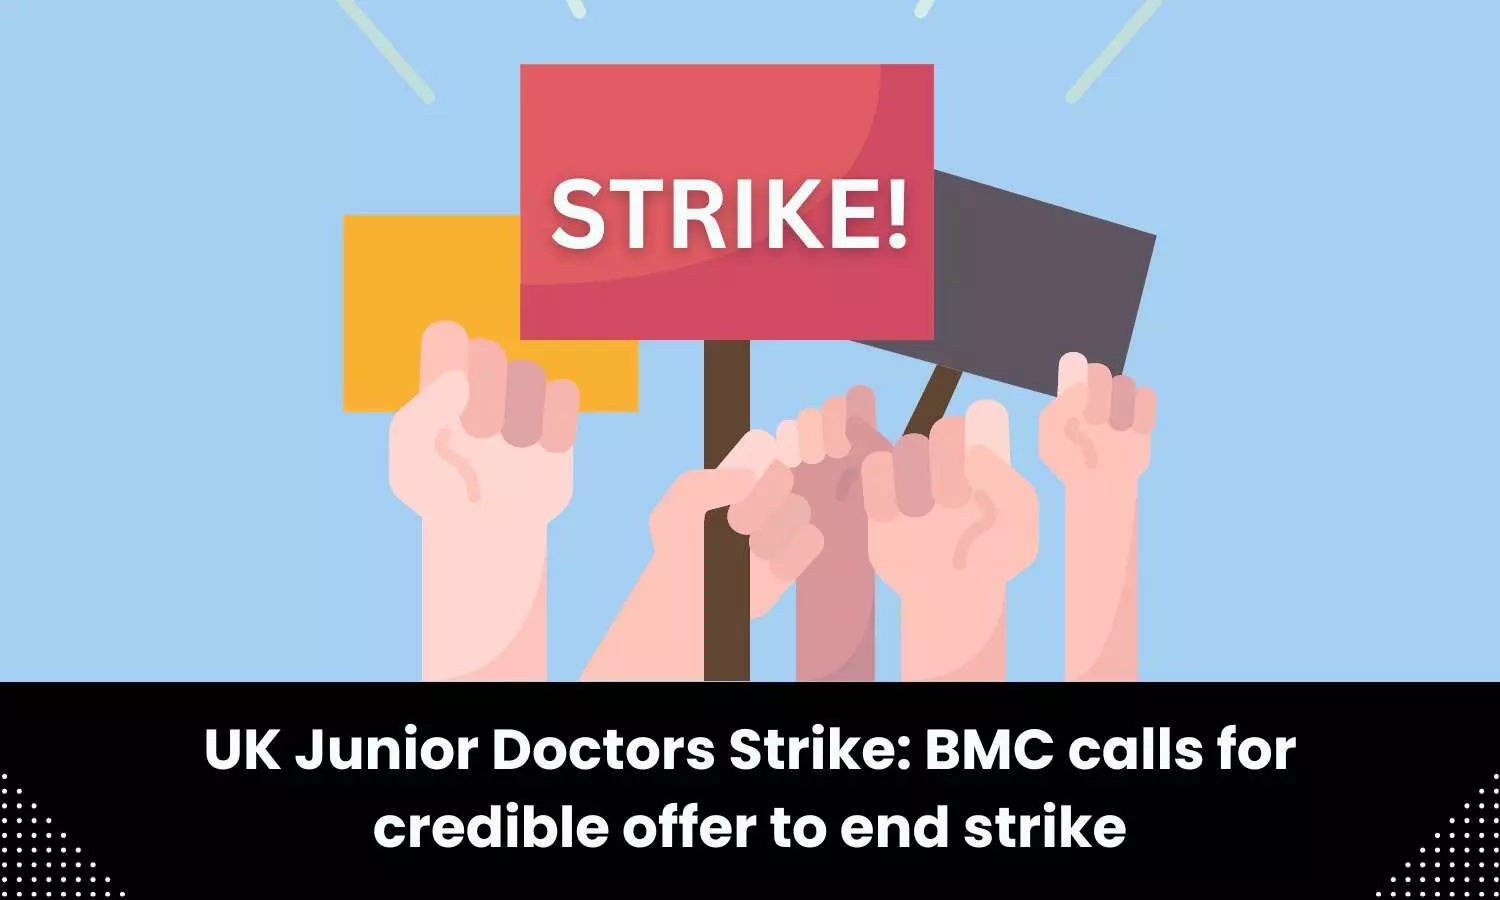 Strike of UK Junior Doctors: BMC calls for credible offer to end strike